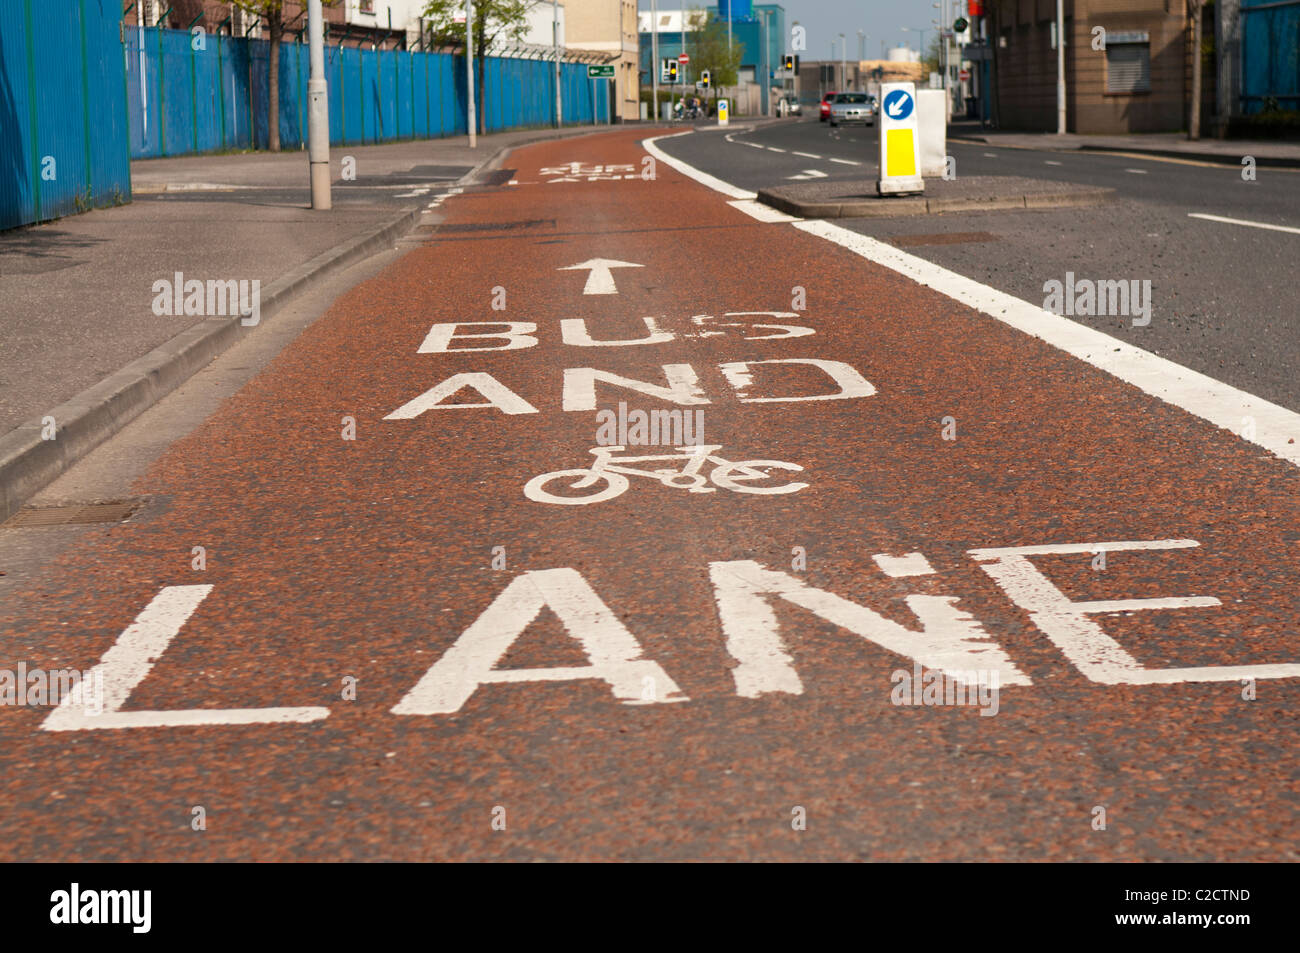 Bus and cycle lane road markings Stock Photo